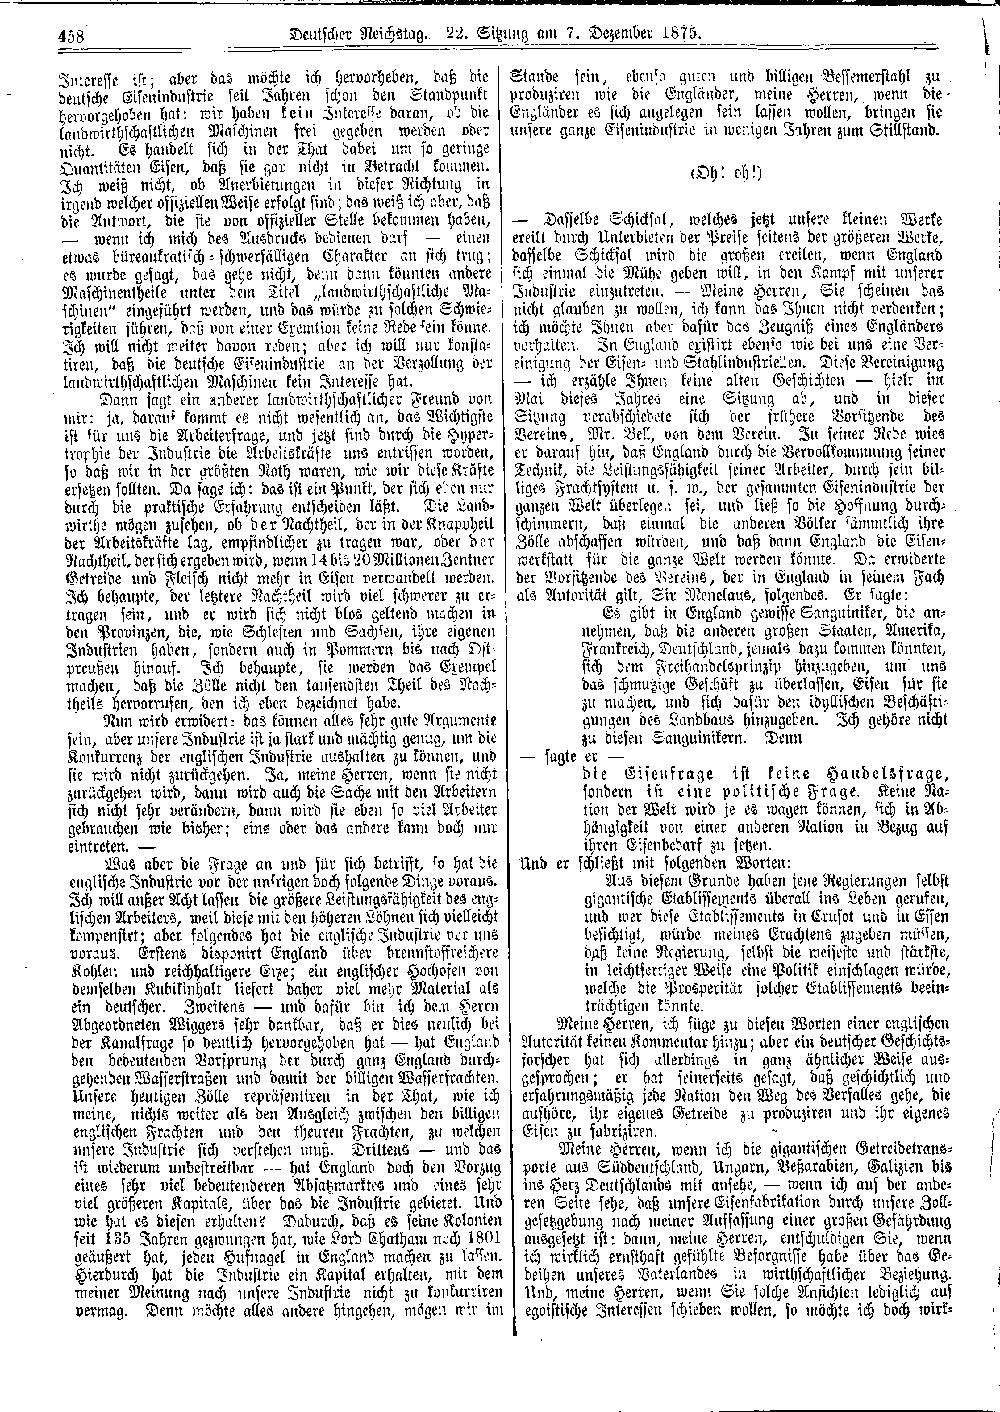 Scan of page 458